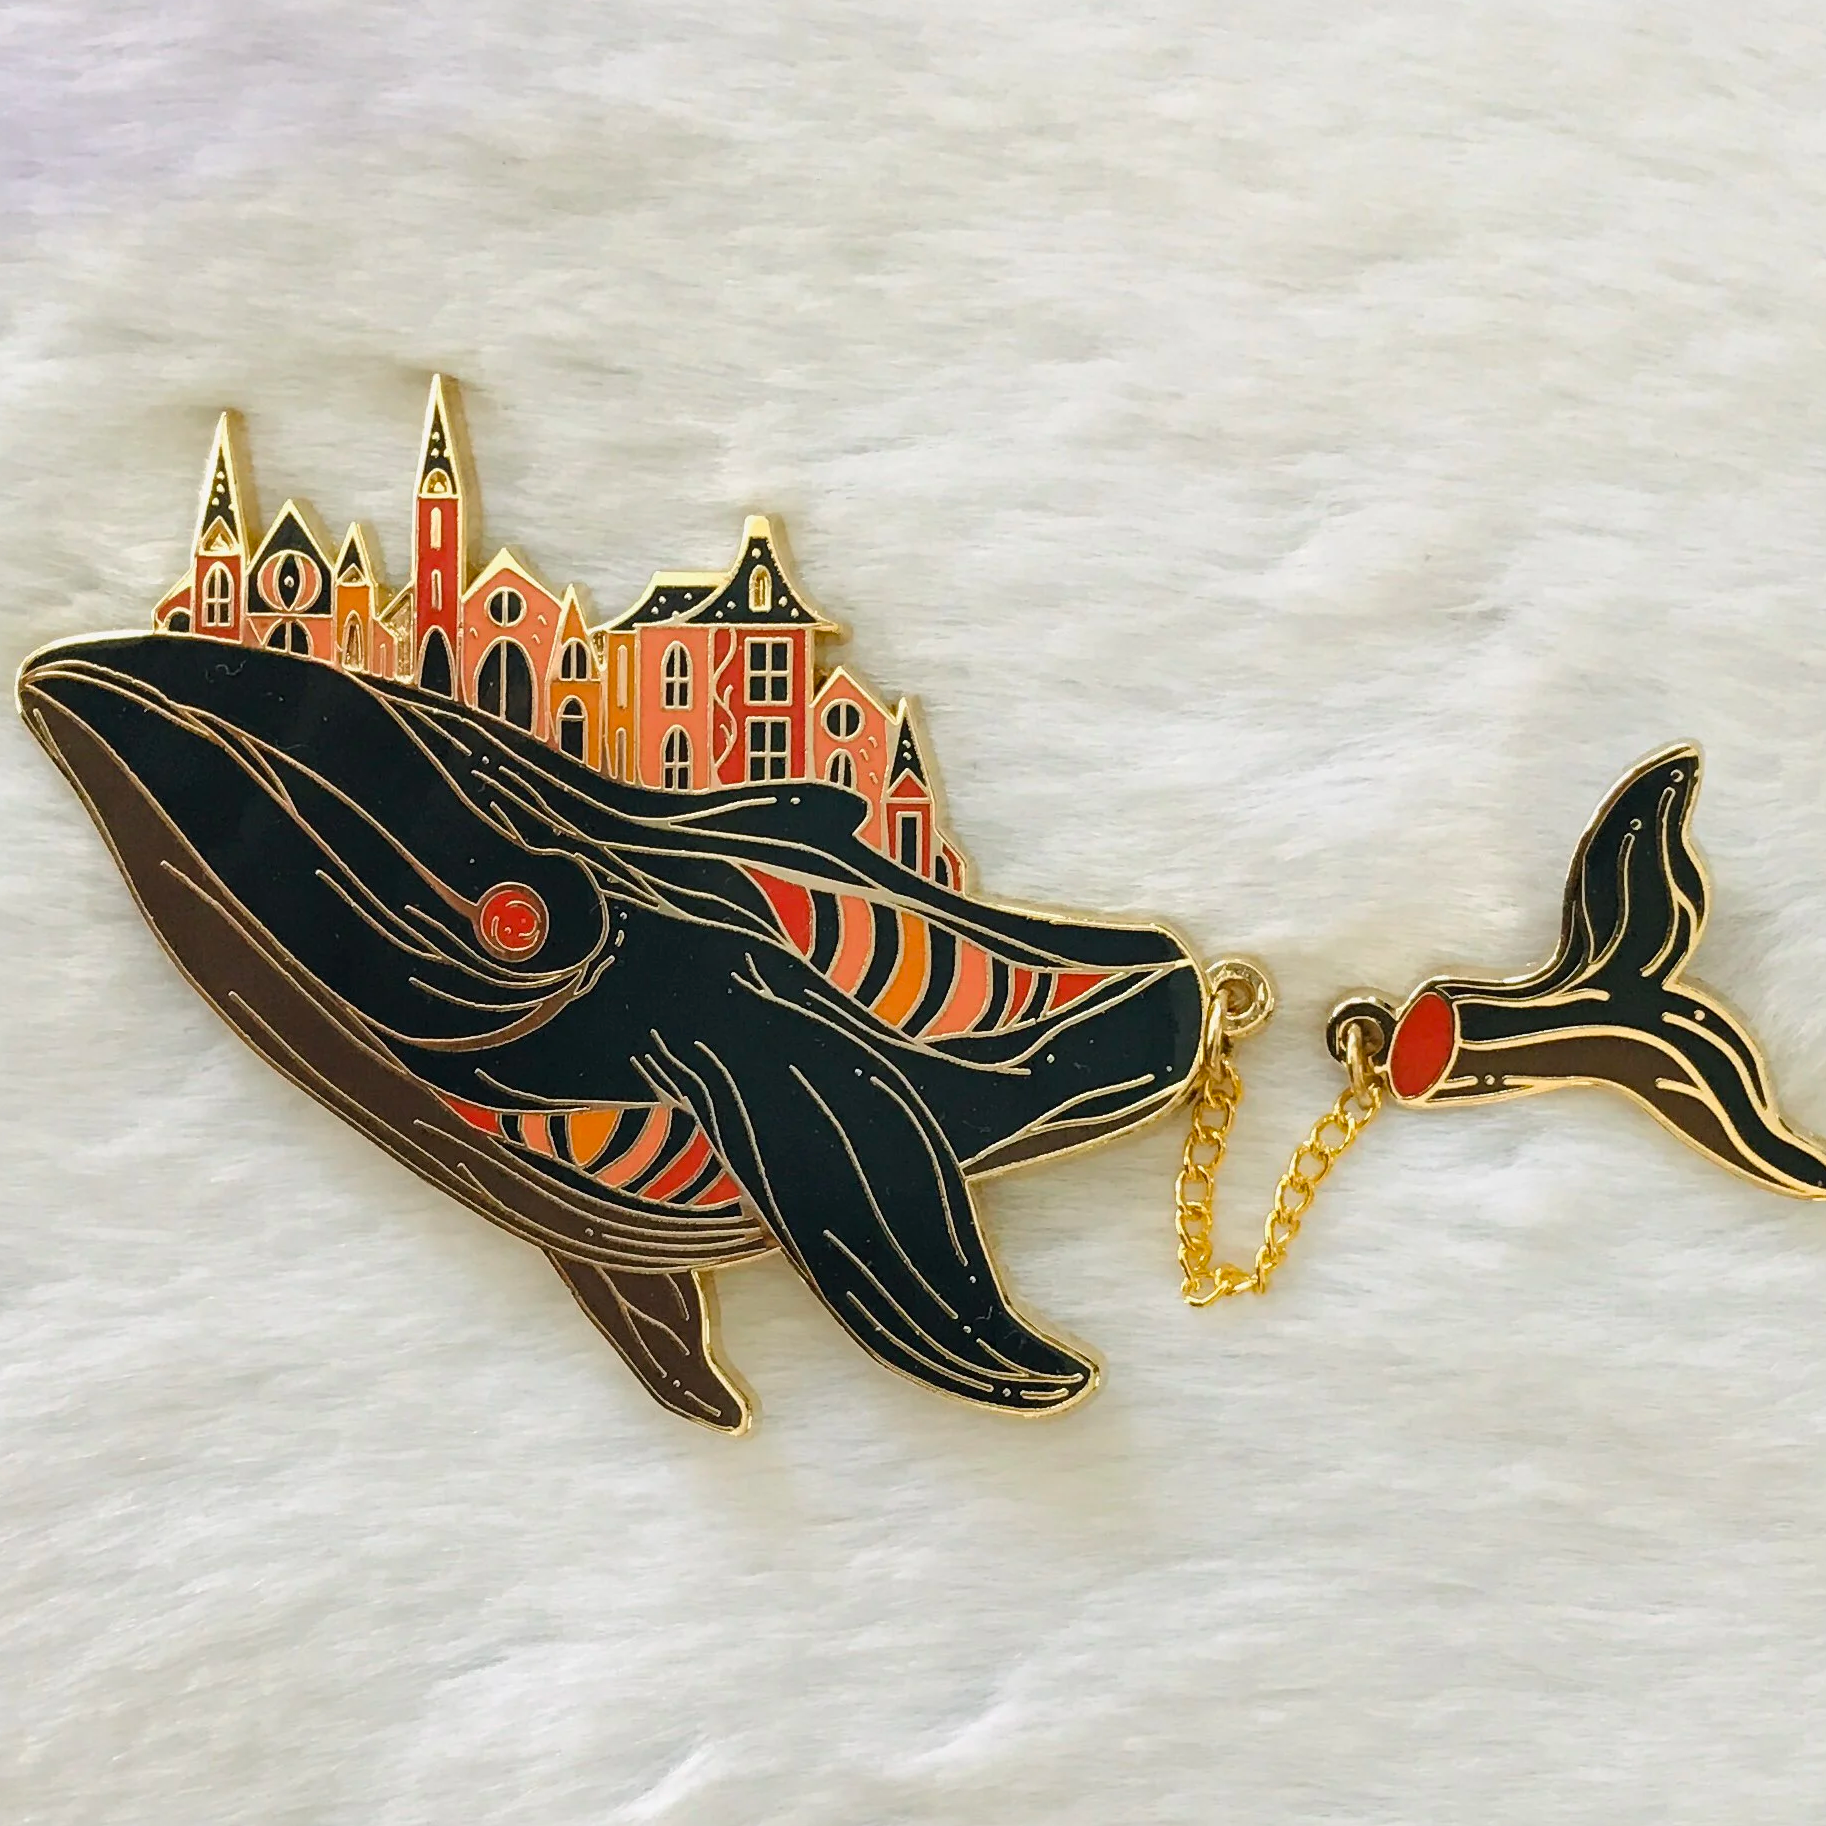 Custom gold plated whale metal pin badges unique glitter design lapel pins three style enamel pins